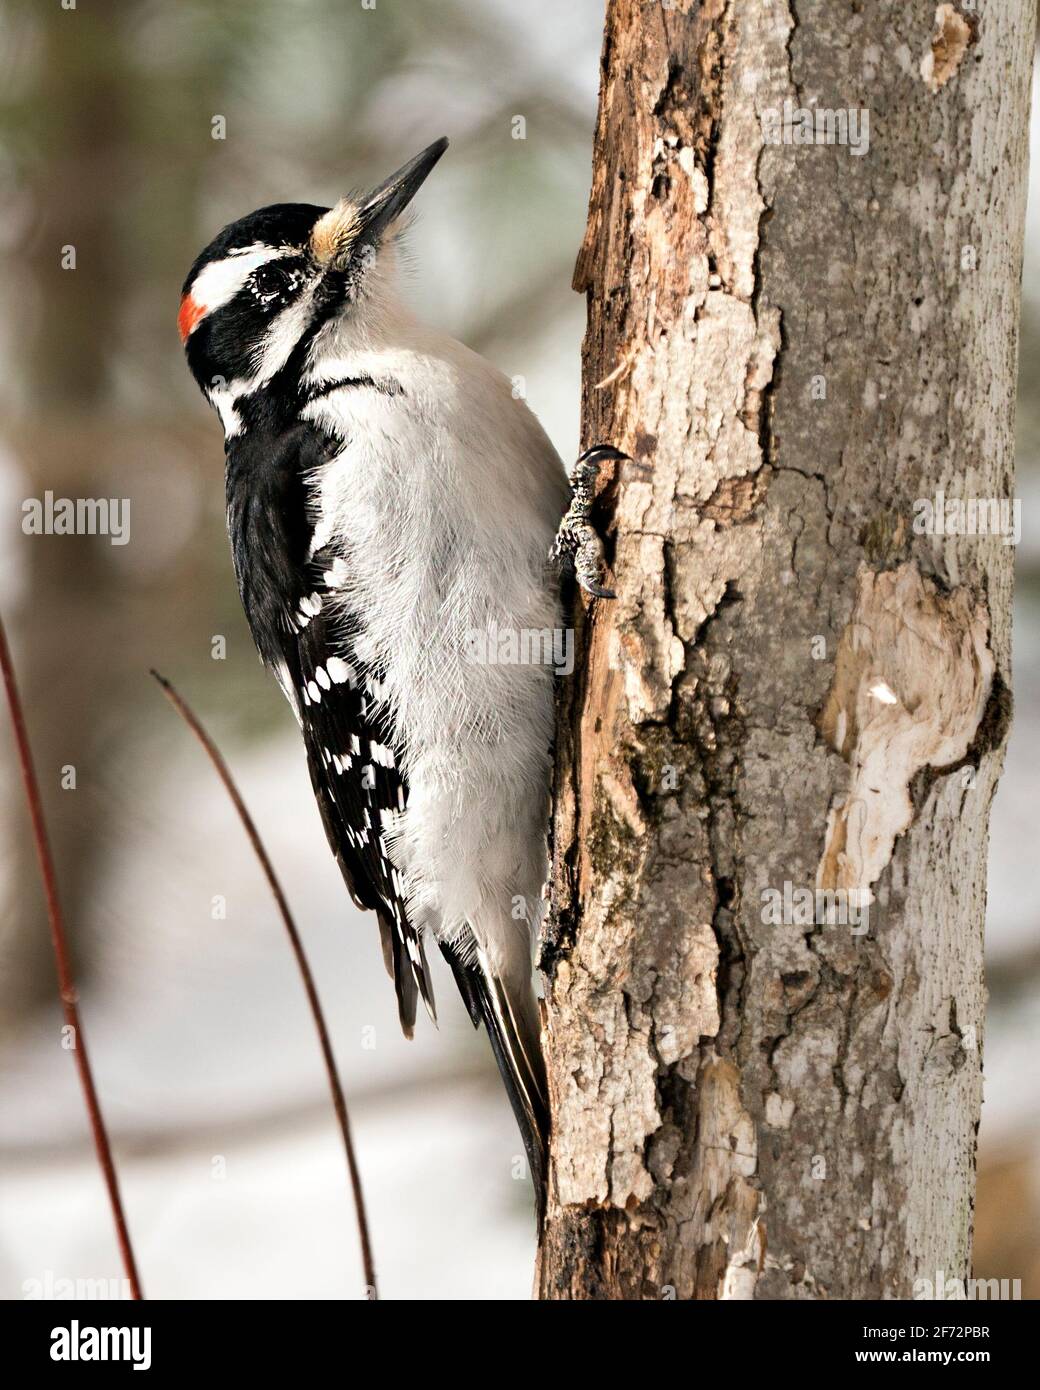 Woodpecker close-up profile view climbing tree trunk and displaying feather plumage in its environment and habitat in the forest. Image. Picture. Stock Photo